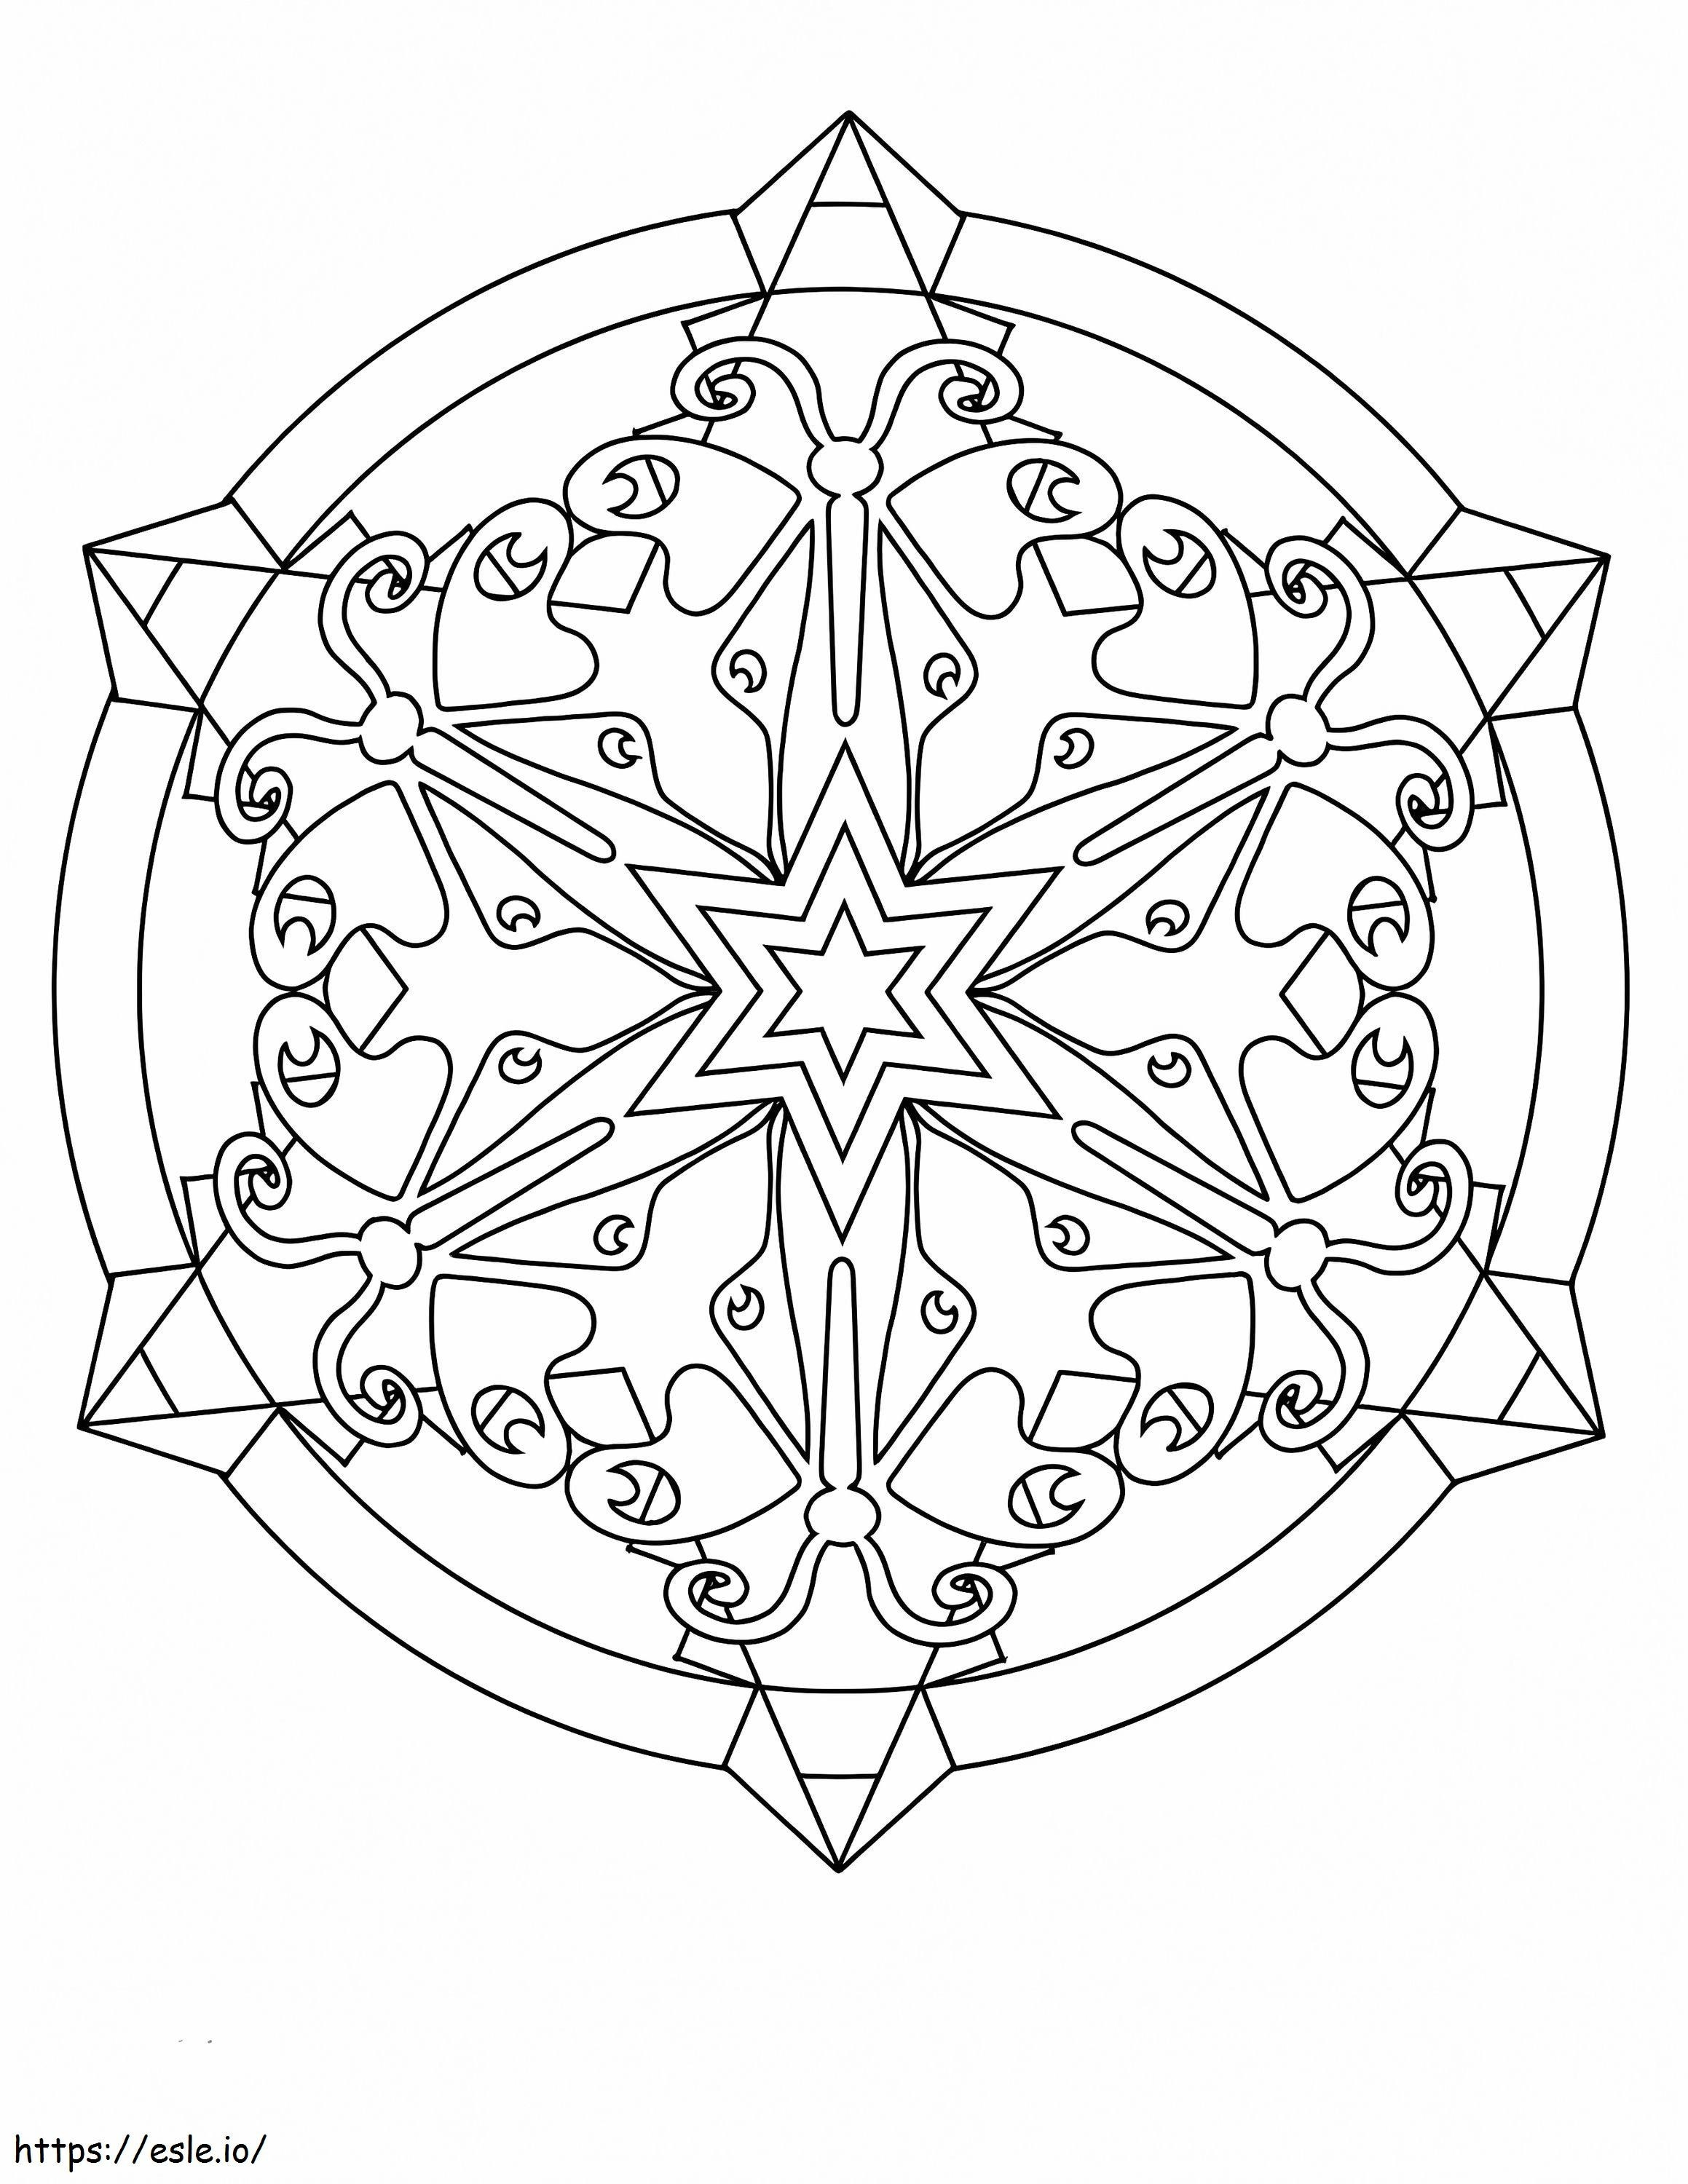 Kaleidoscope 7 coloring page